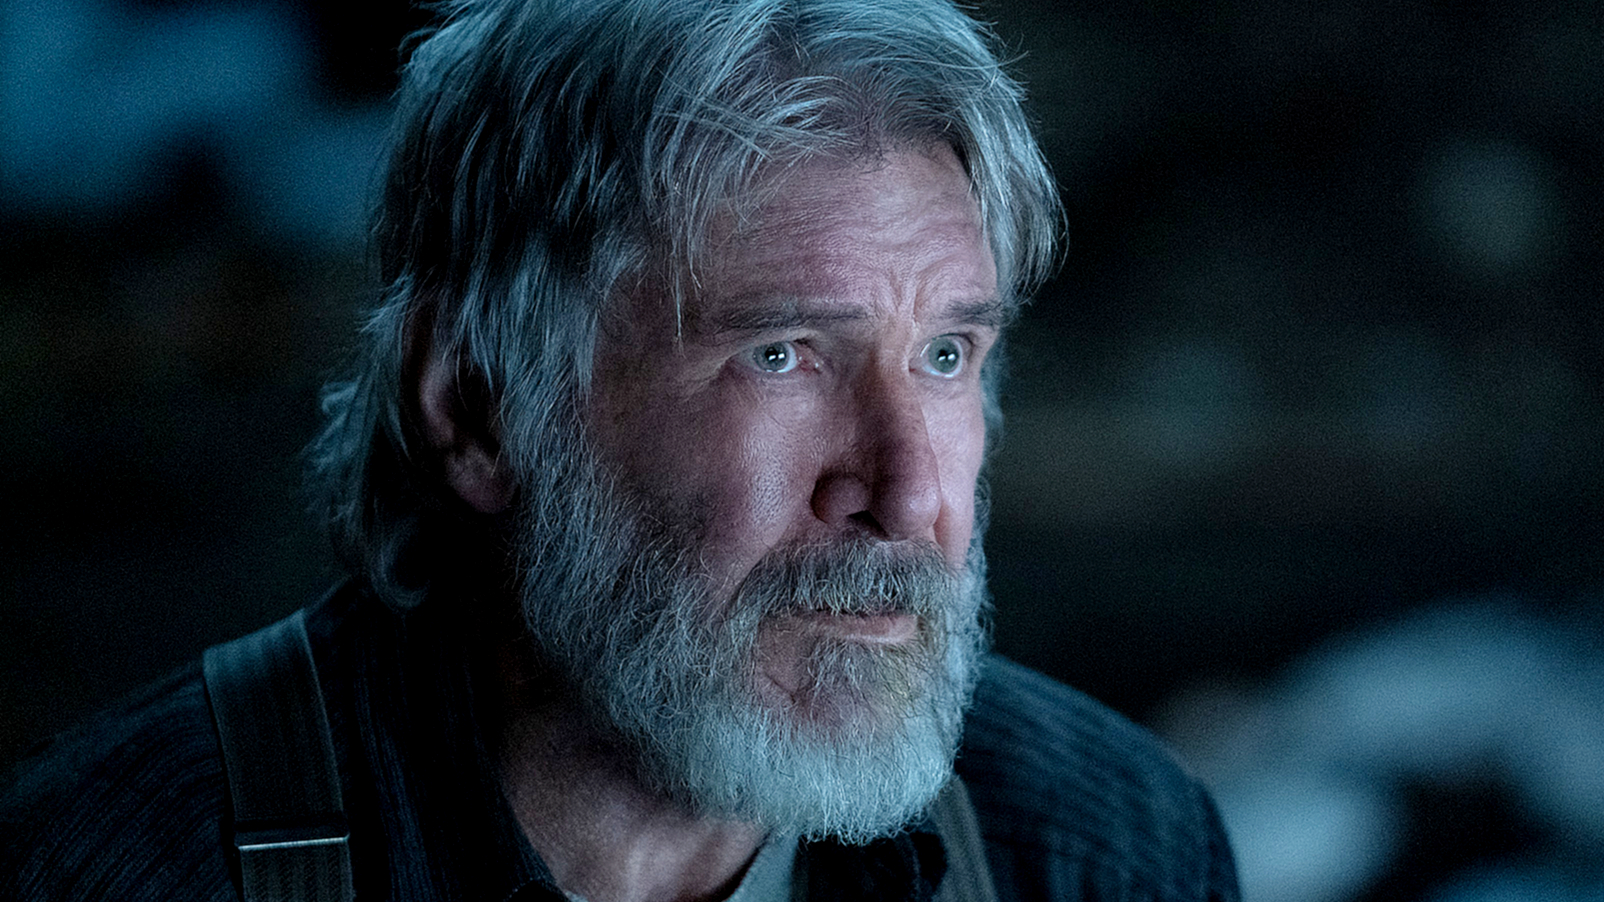 Harrison Ford, not Tom Cruise, is the real silver-screen hero